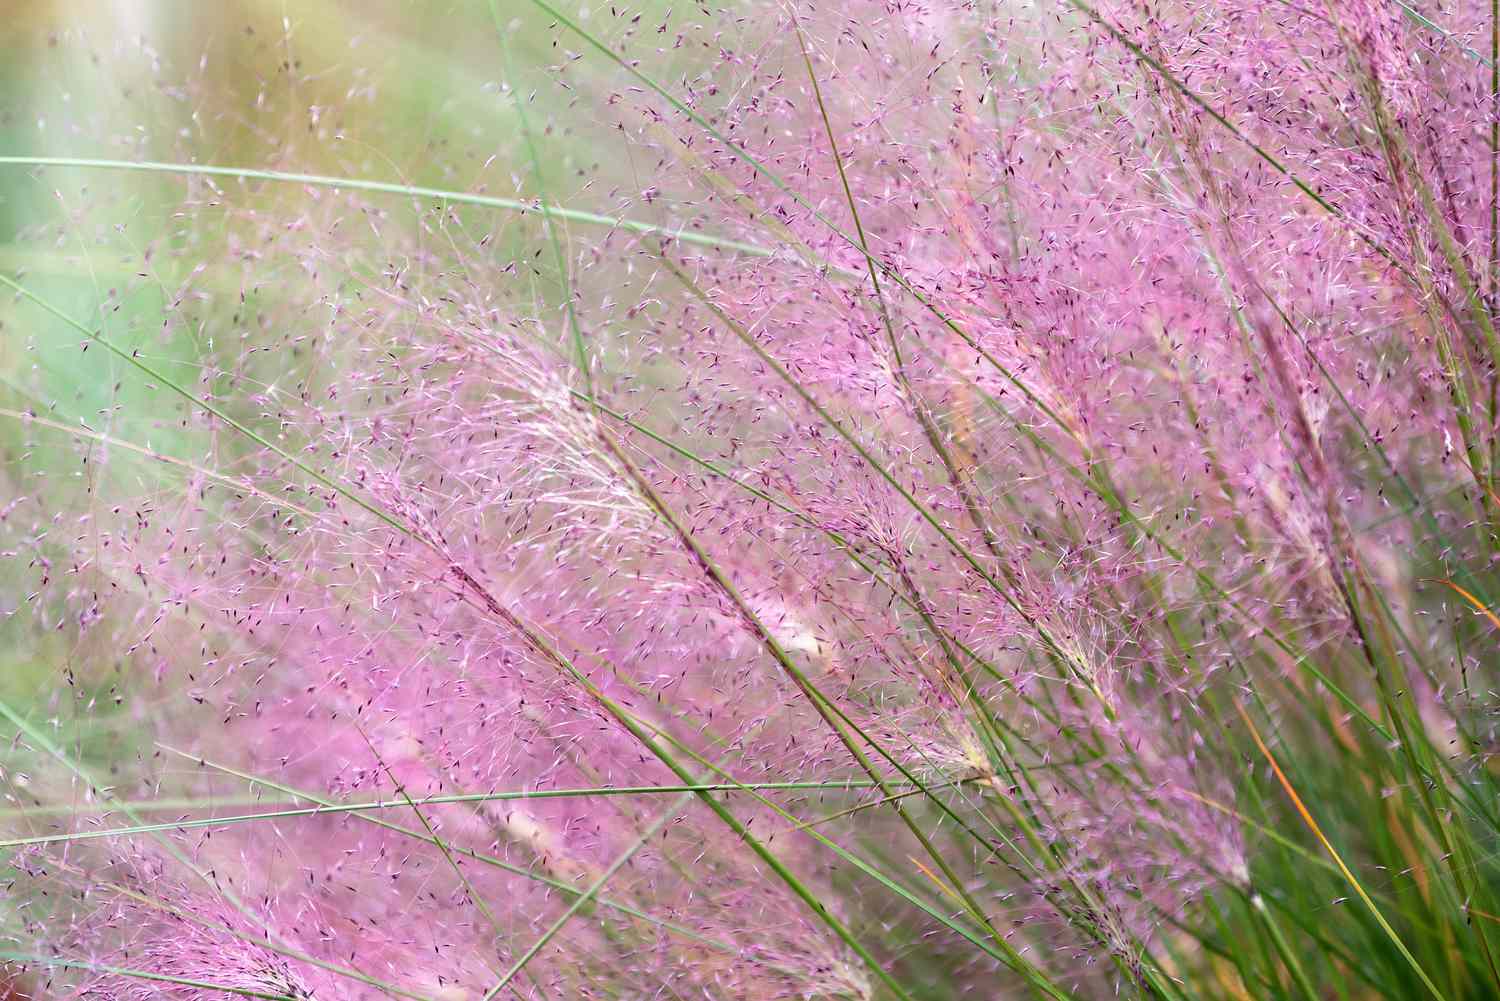 Pink muhly grass with soft and fuzzy flower plumes